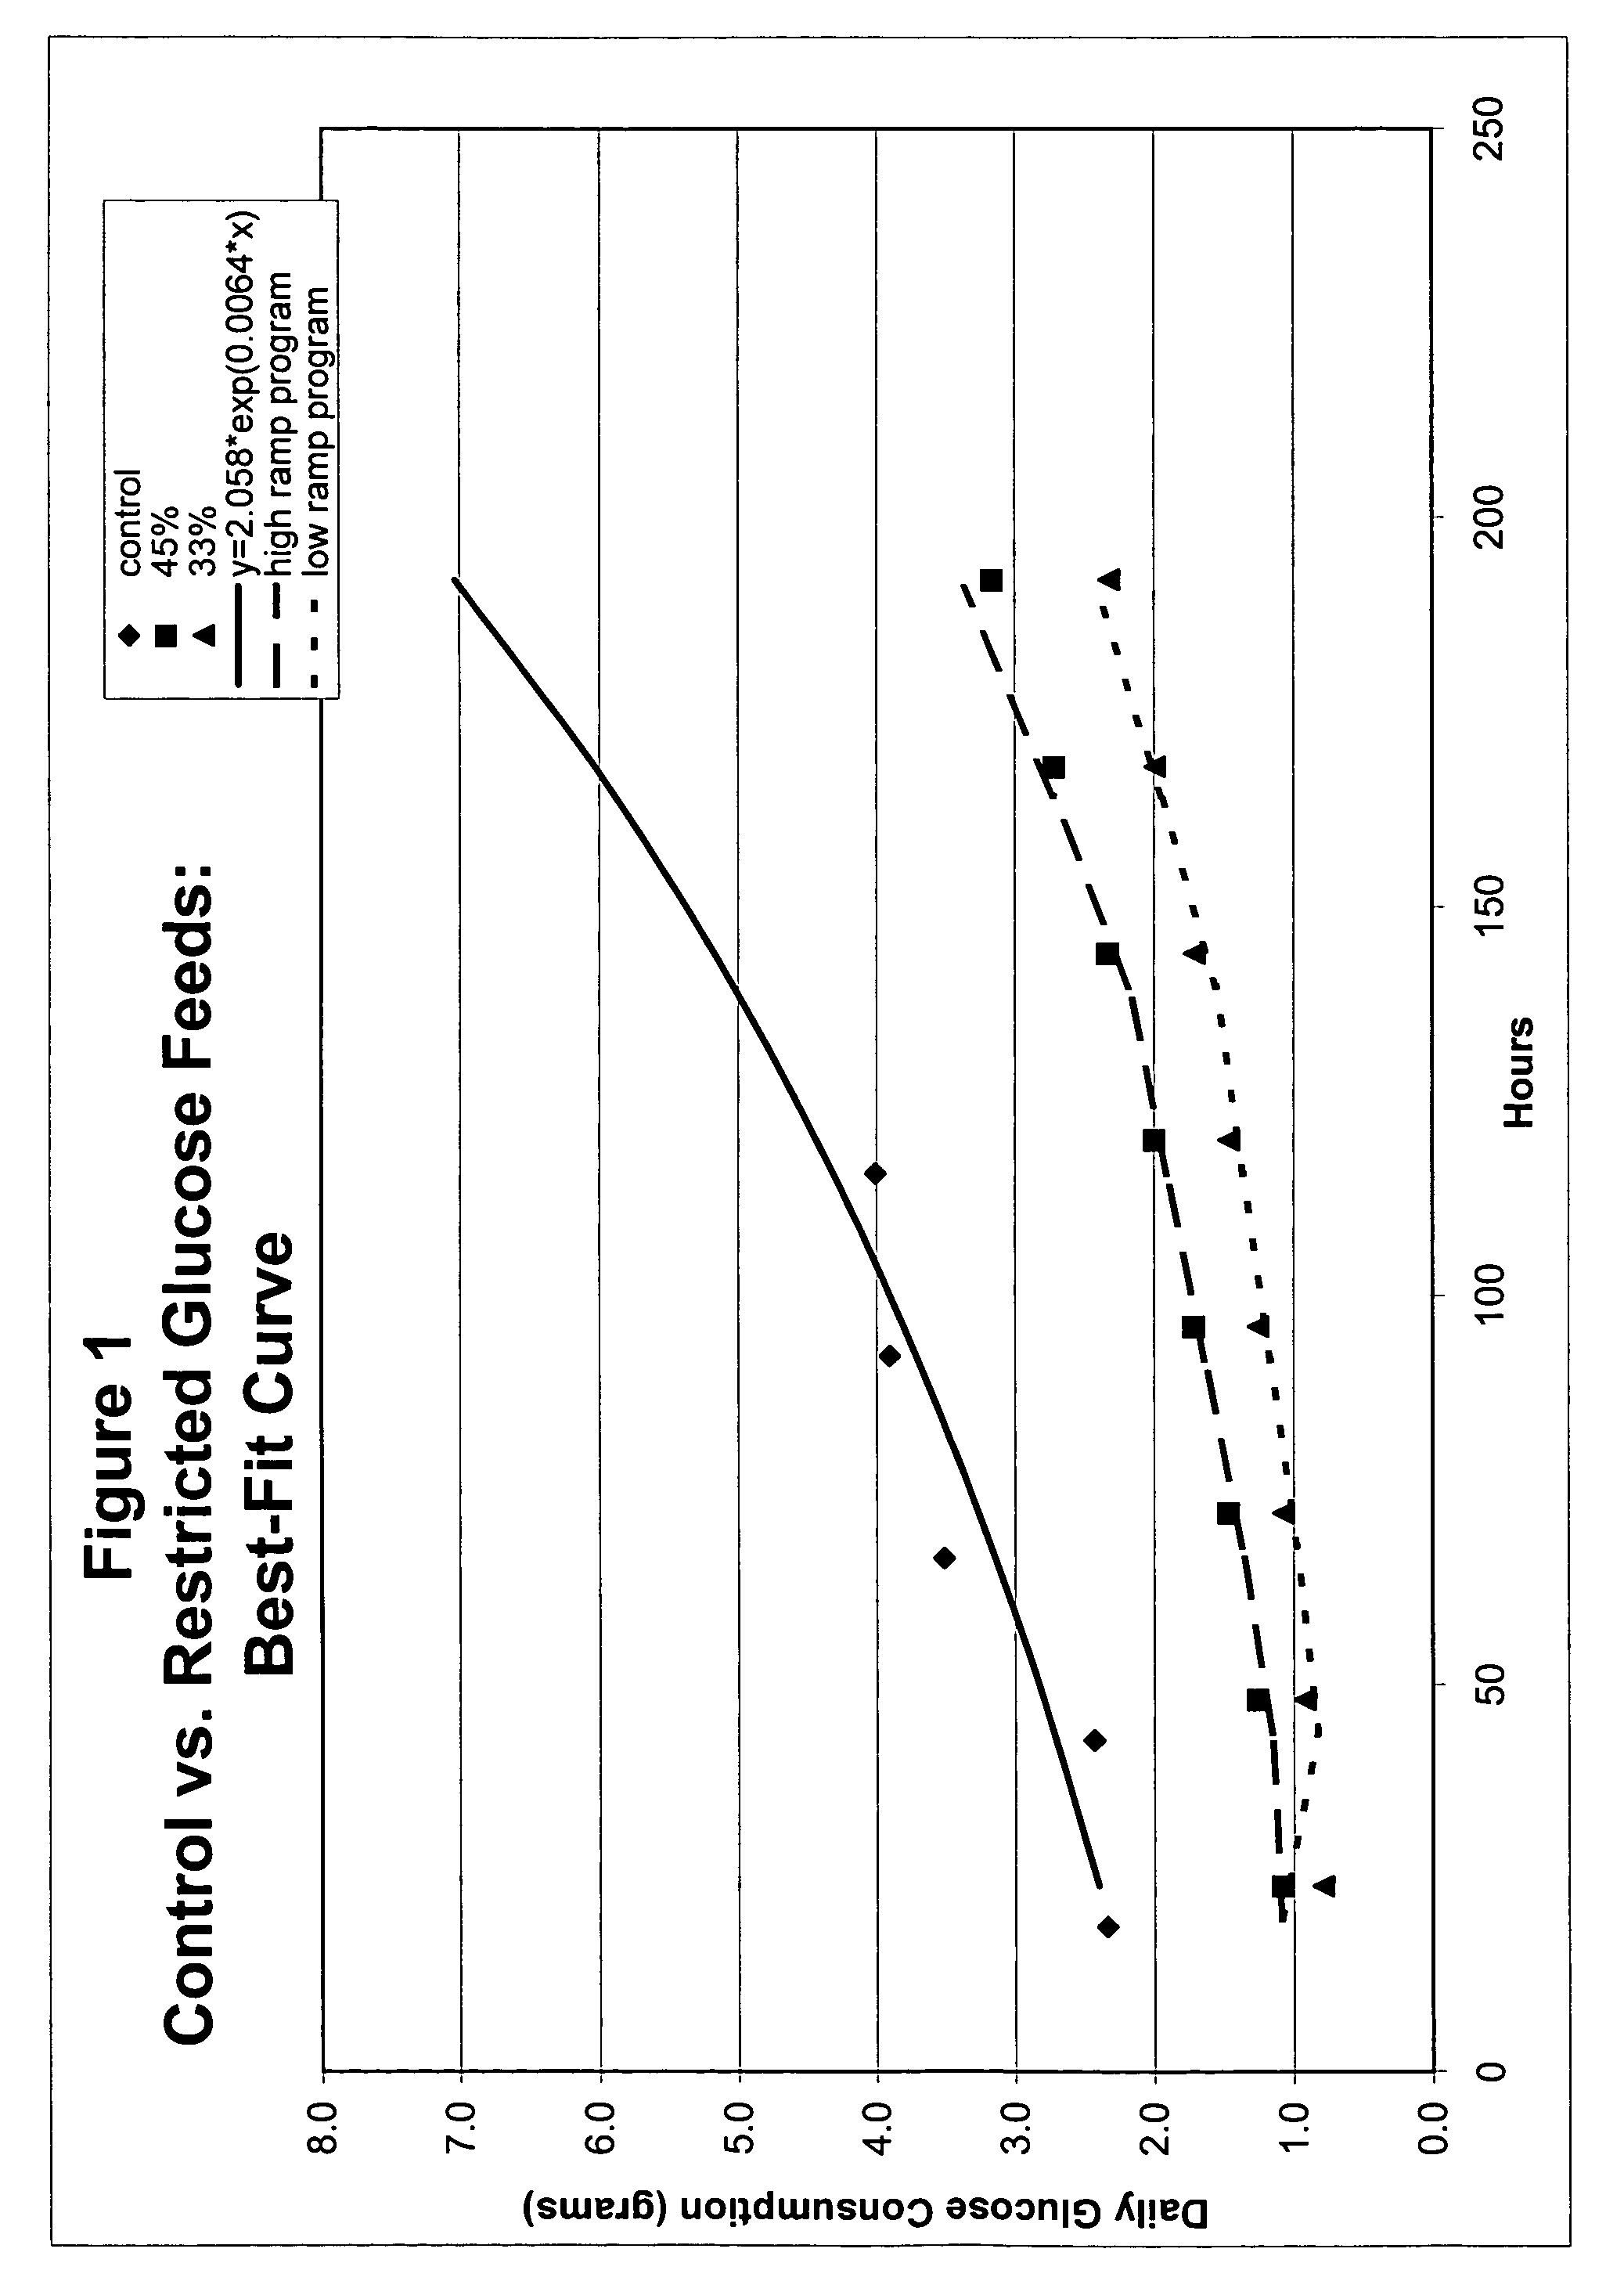 Restricted glucose feed for animal cell culture